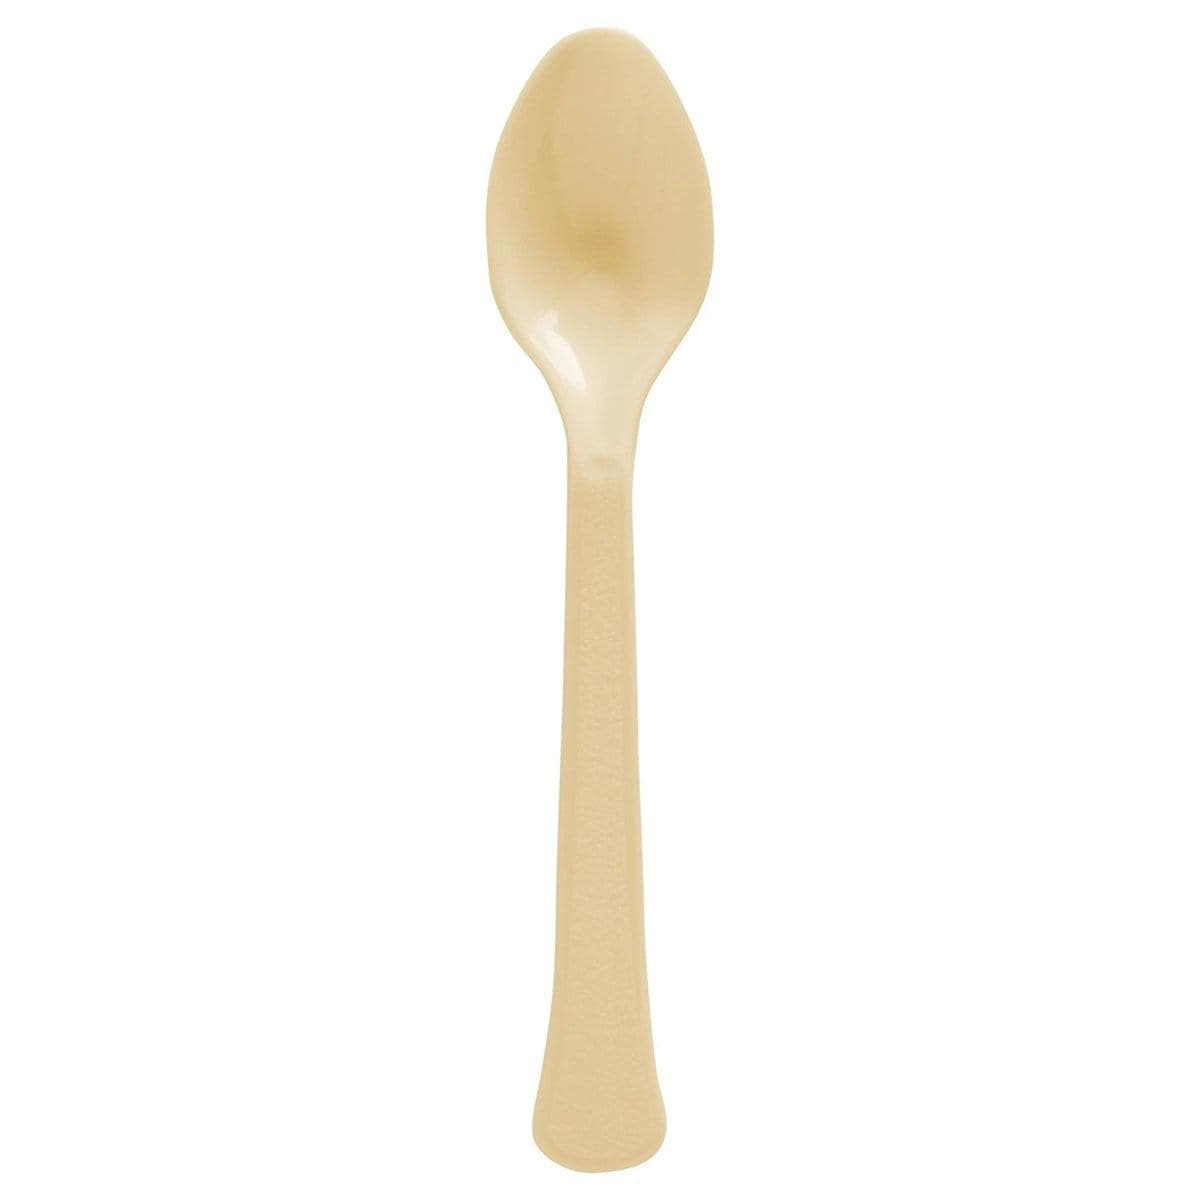 Buy plasticware Gold Plastic Spoons, 20 Count sold at Party Expert